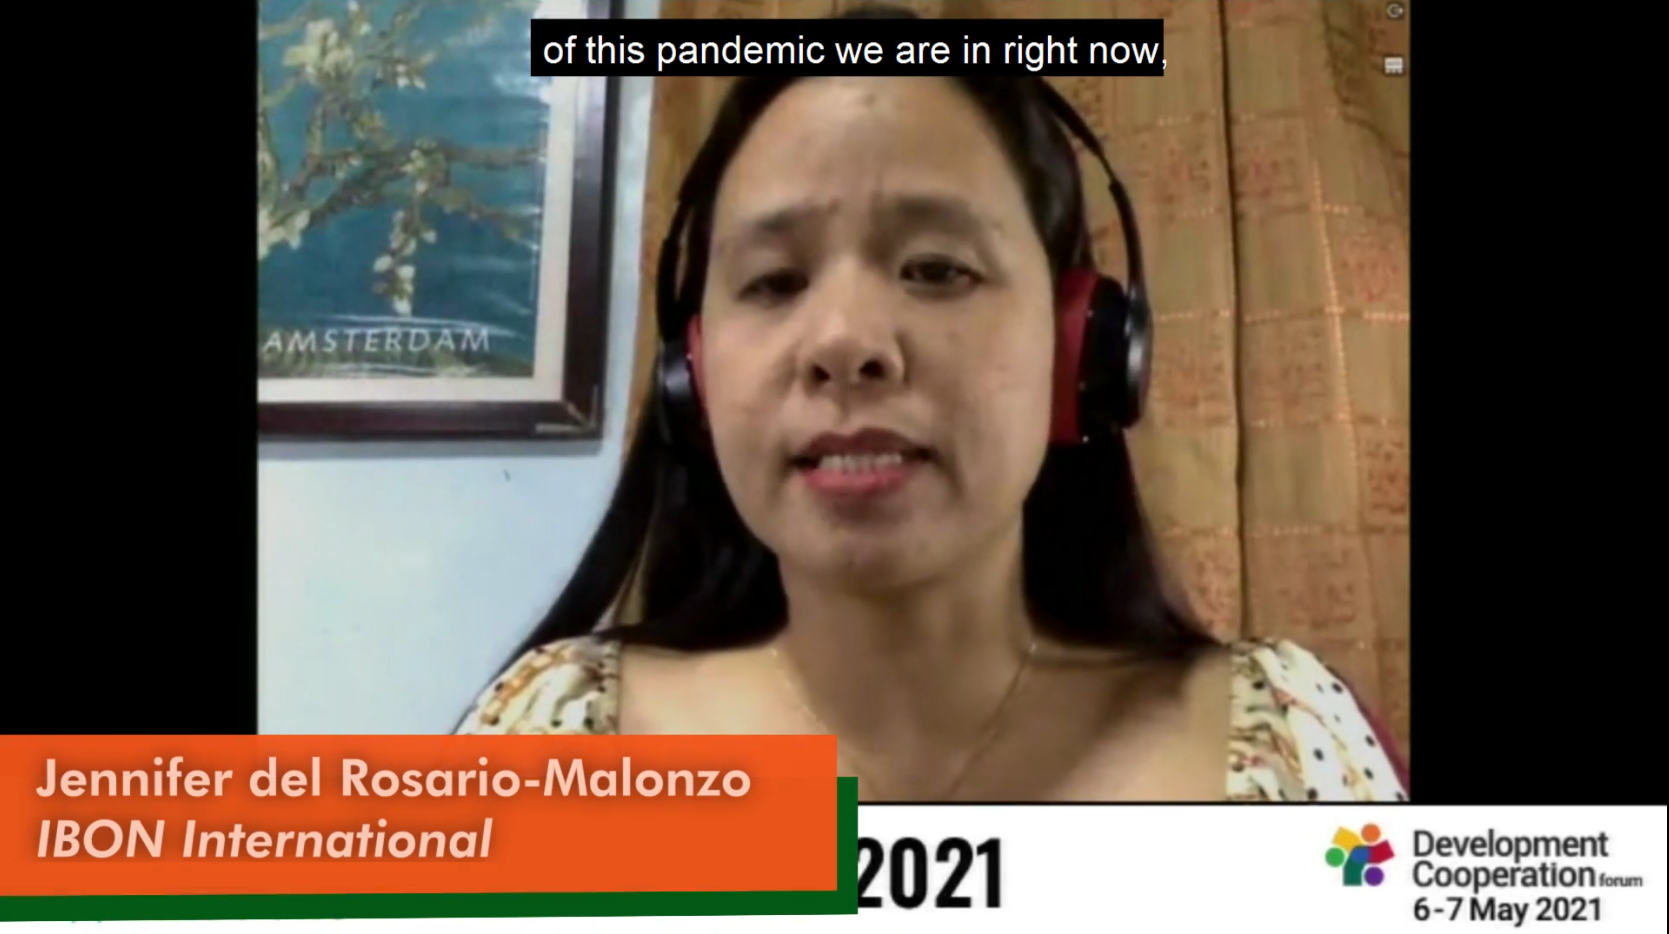 Advance development cooperation towards people-centred pandemic responses and climate action